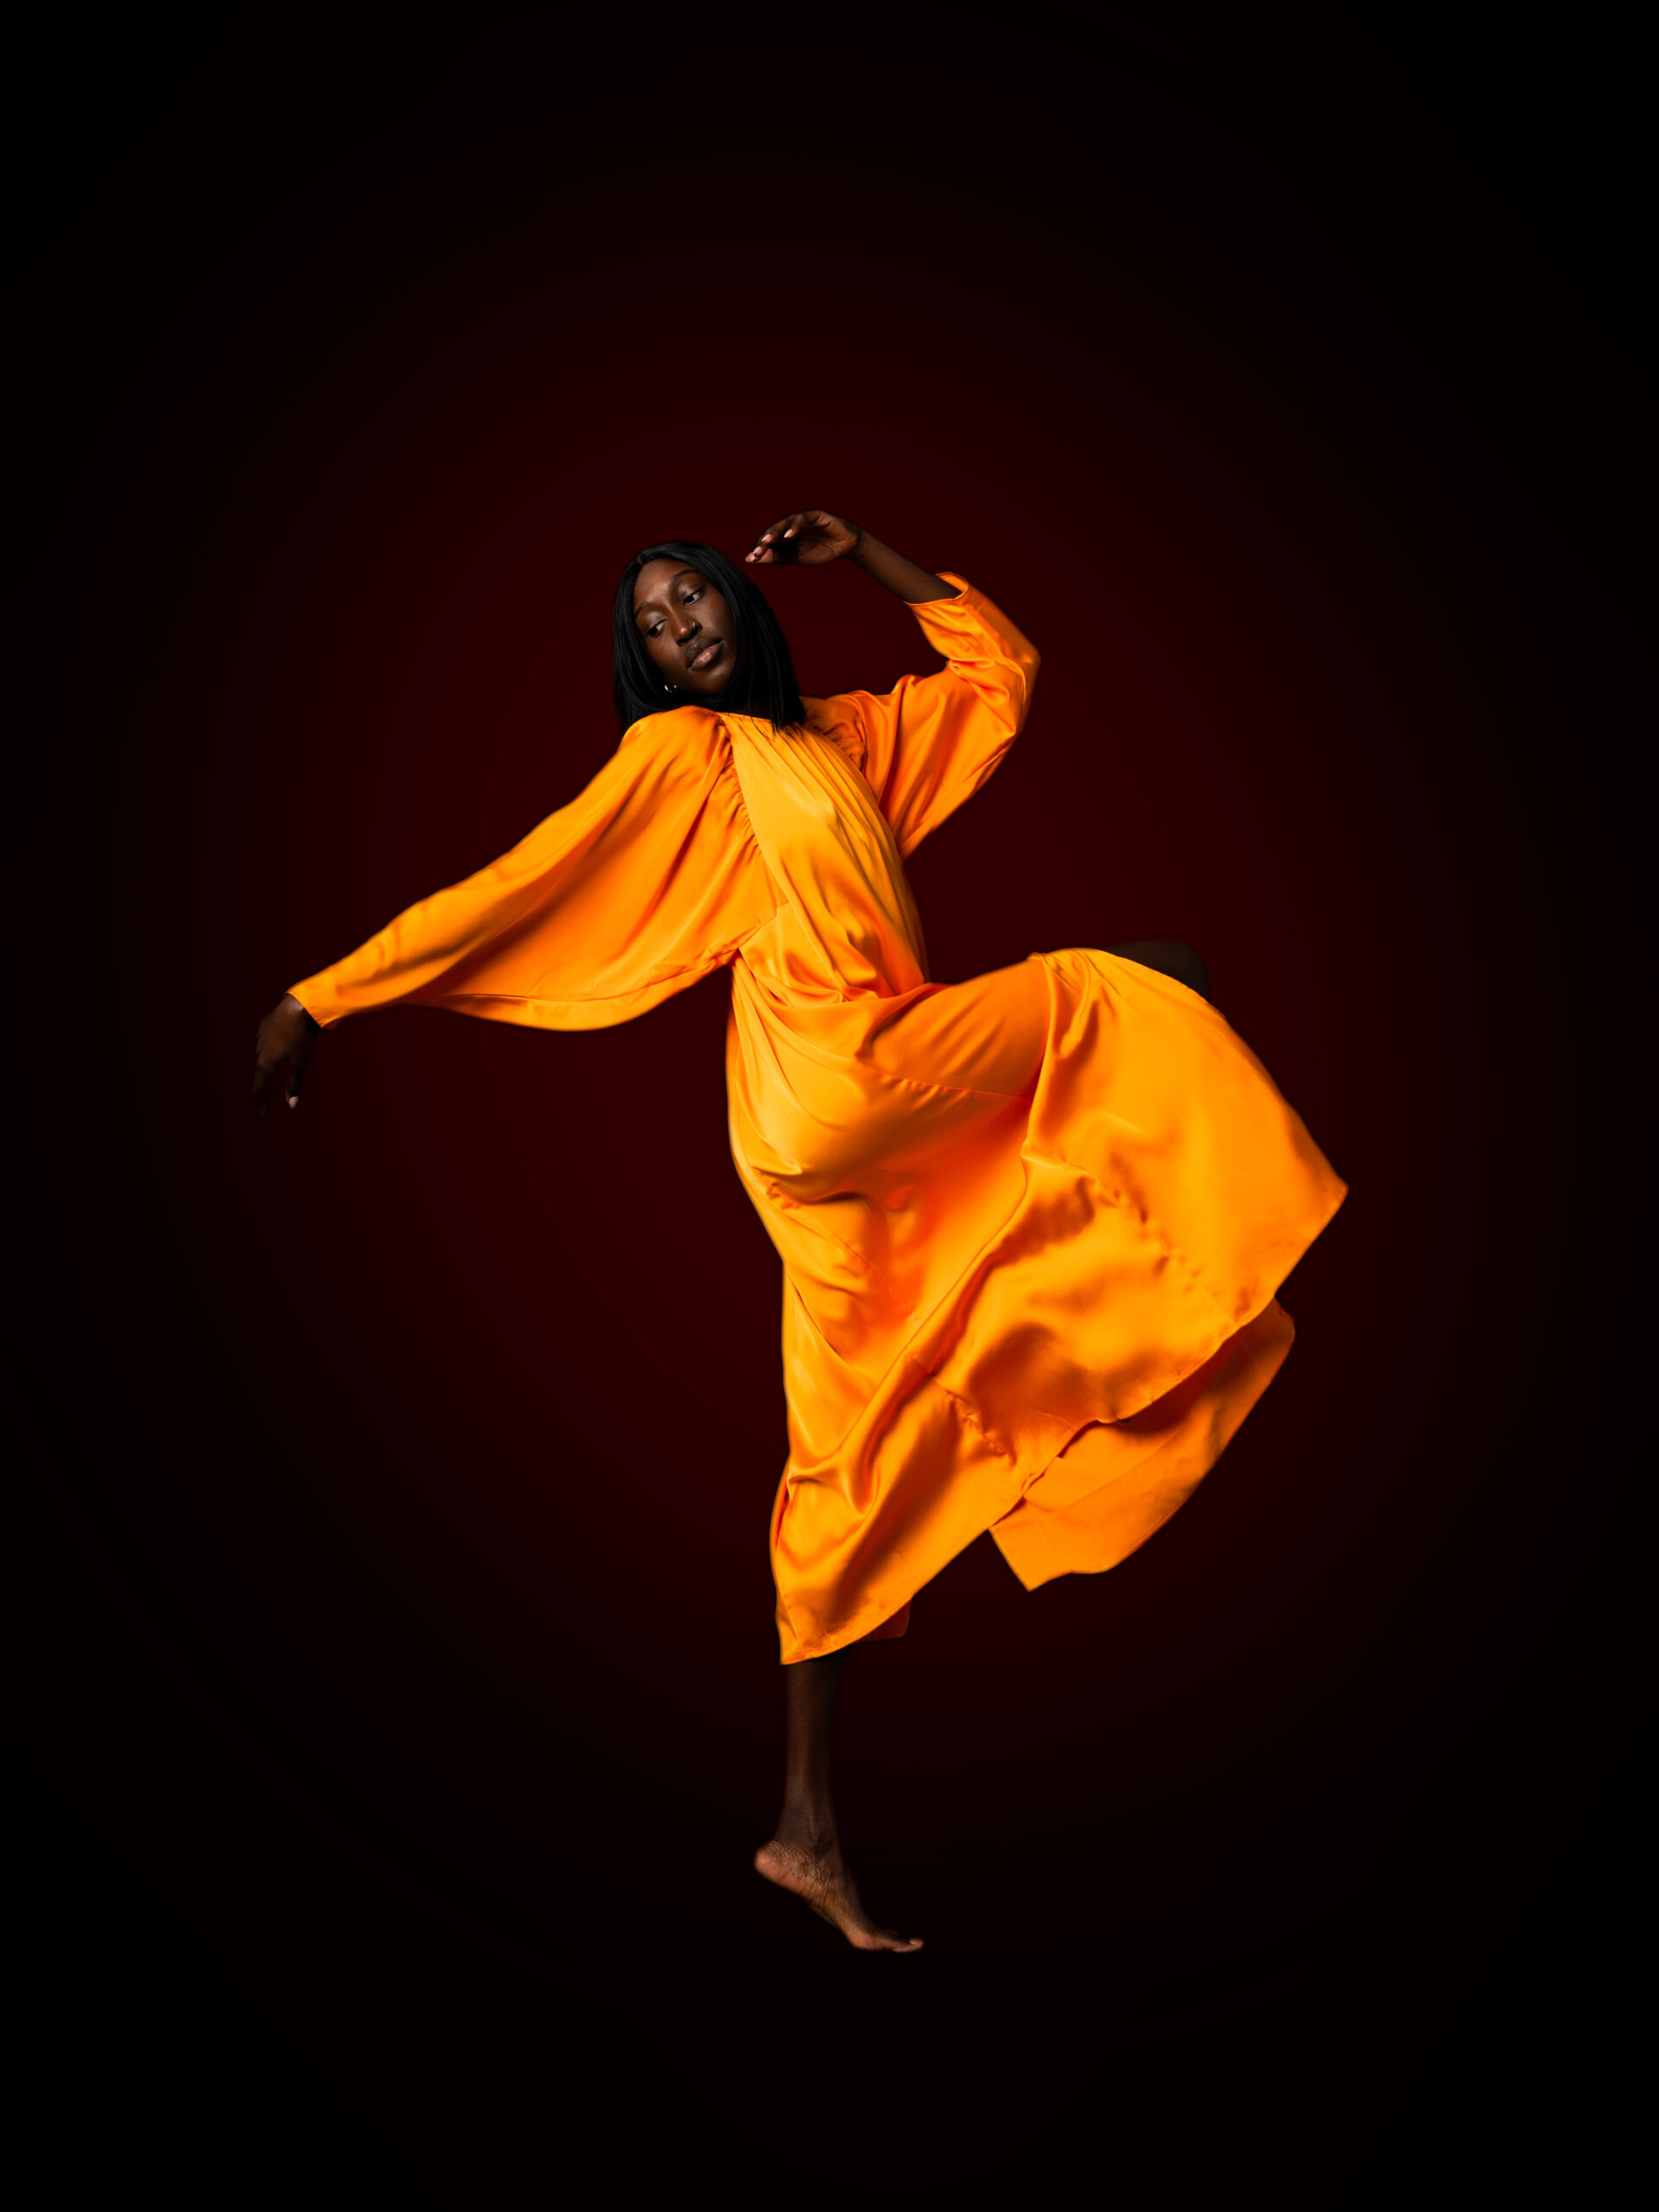 Black model in an orange silk dress kicking her leg and arms in the air against a dark backdrop.